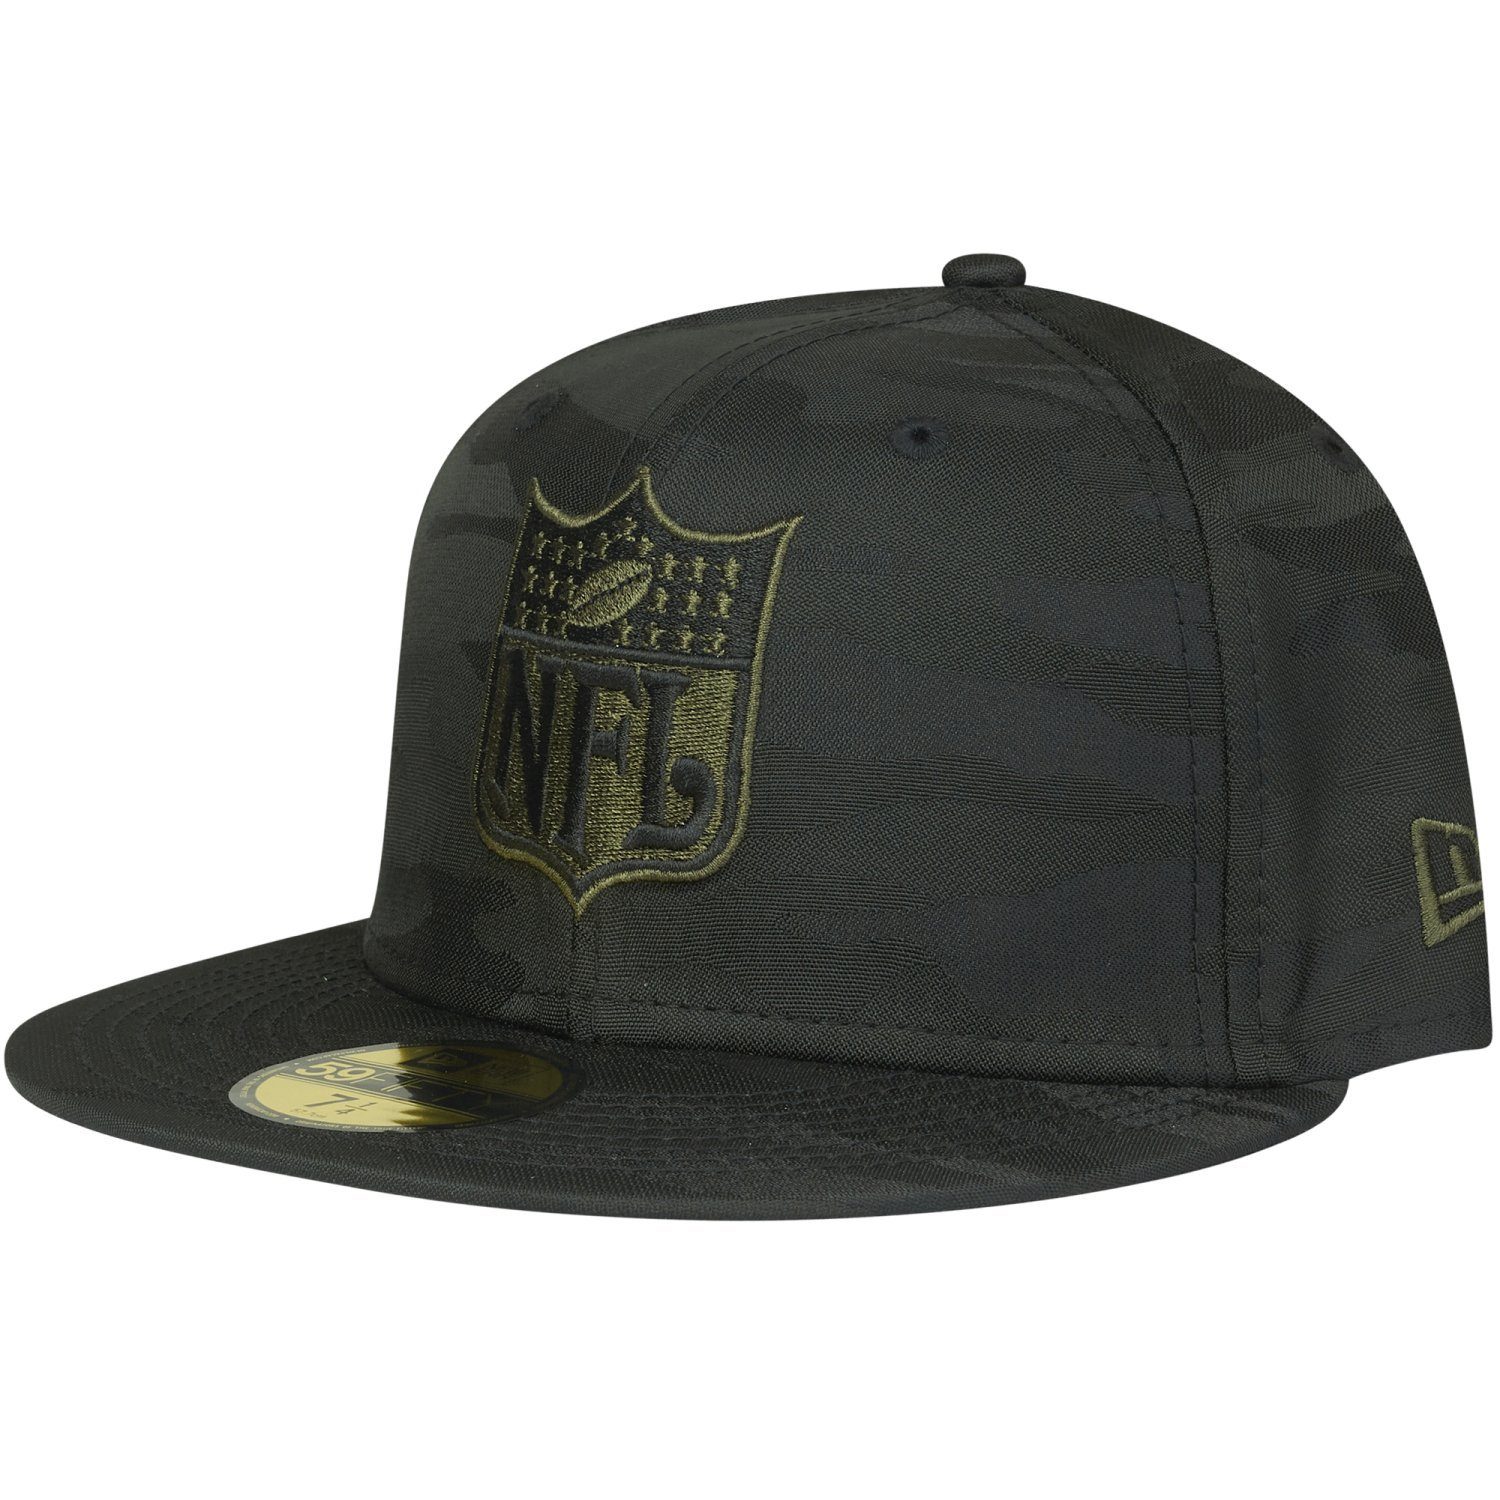 New Era Fitted Cap 59Fifty NFL TEAMS alpine NFL Shield | Fitted Caps